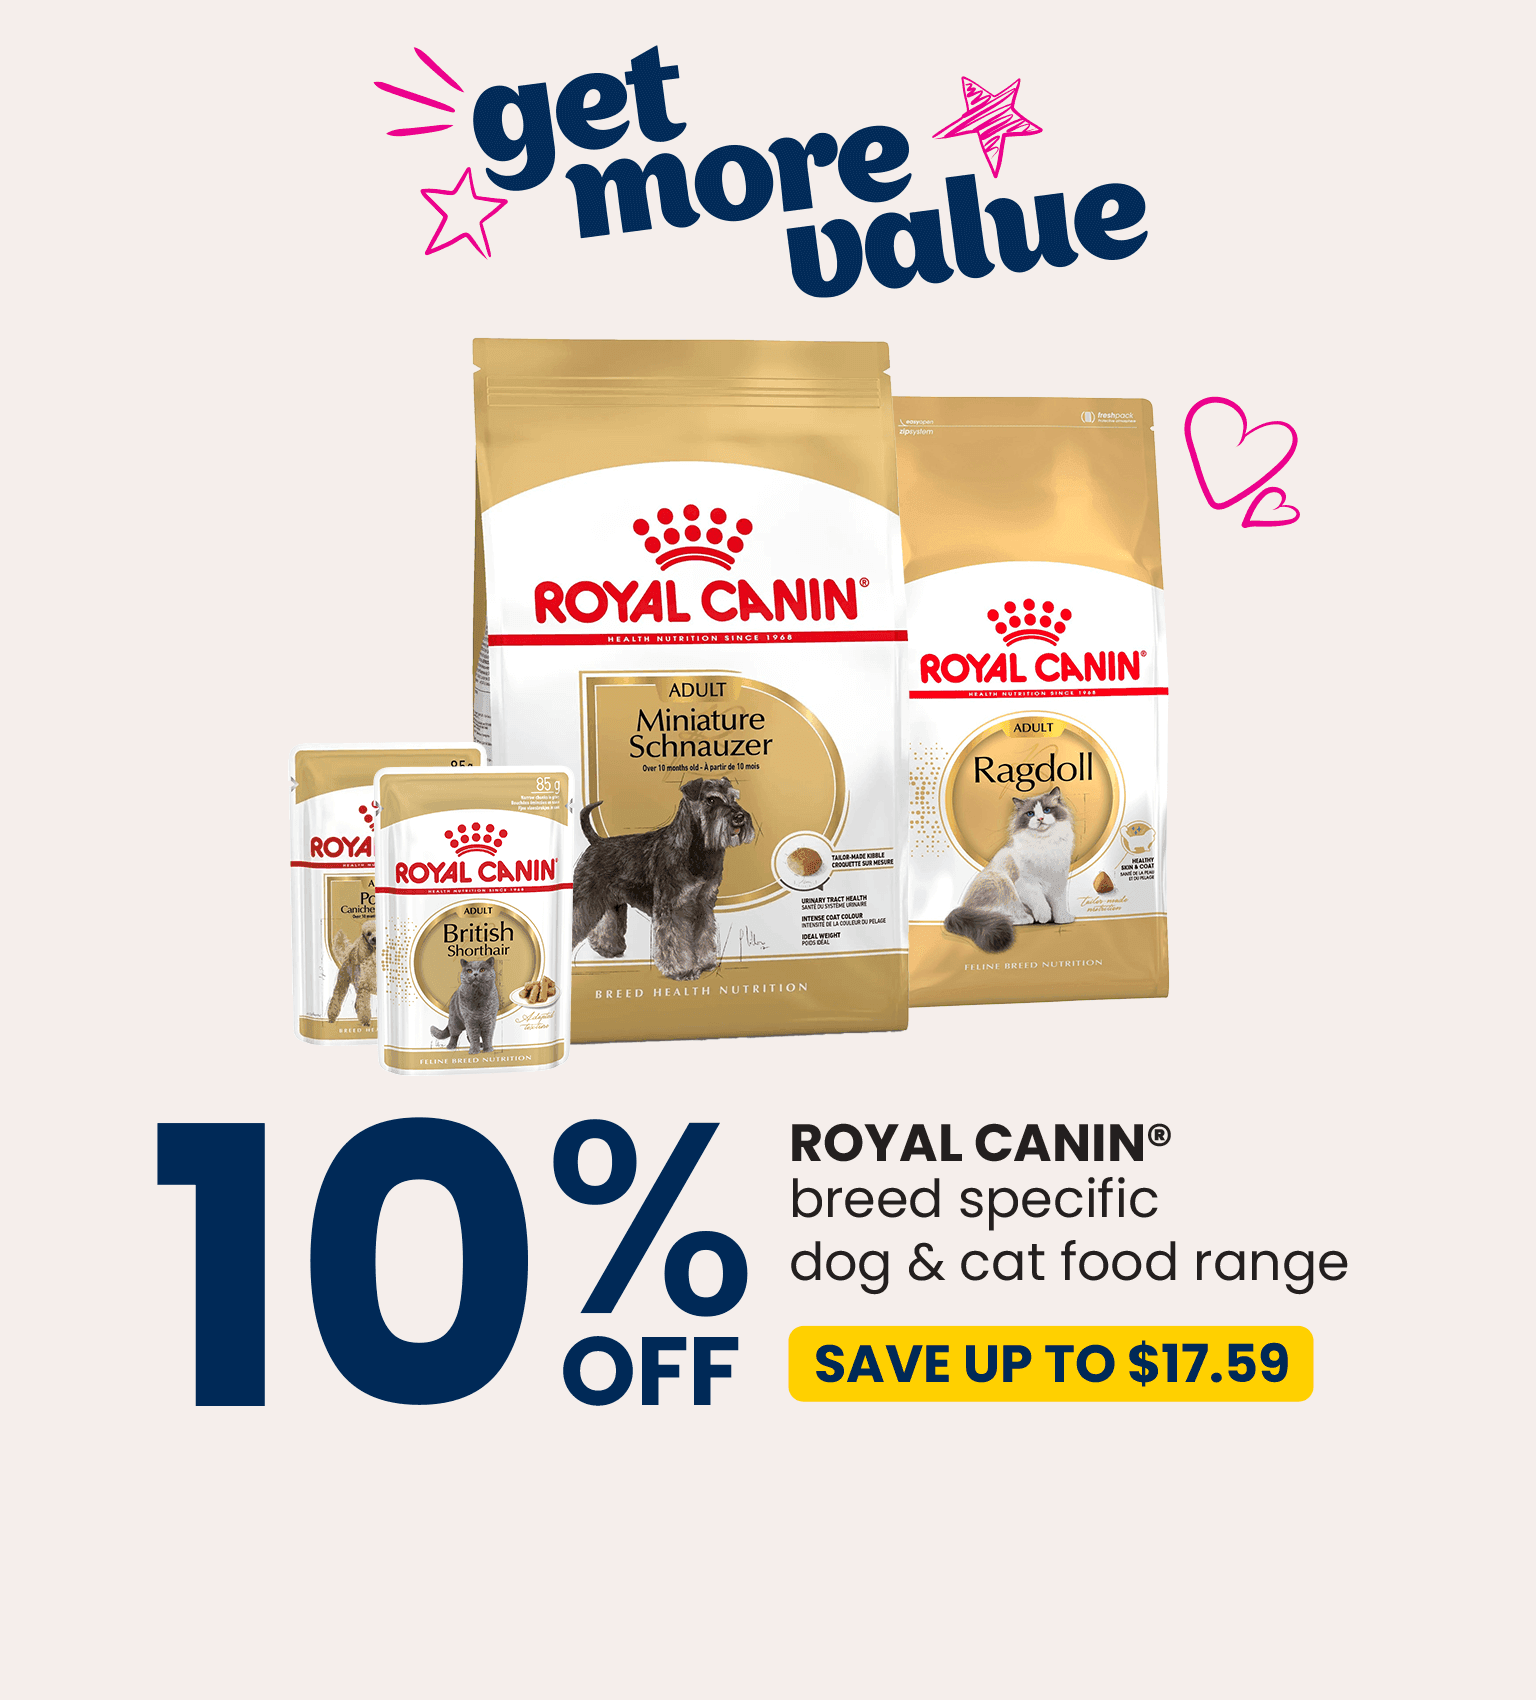 10% OFF - Royal Canin breed specific dog & cat food range. Save up to $17.59